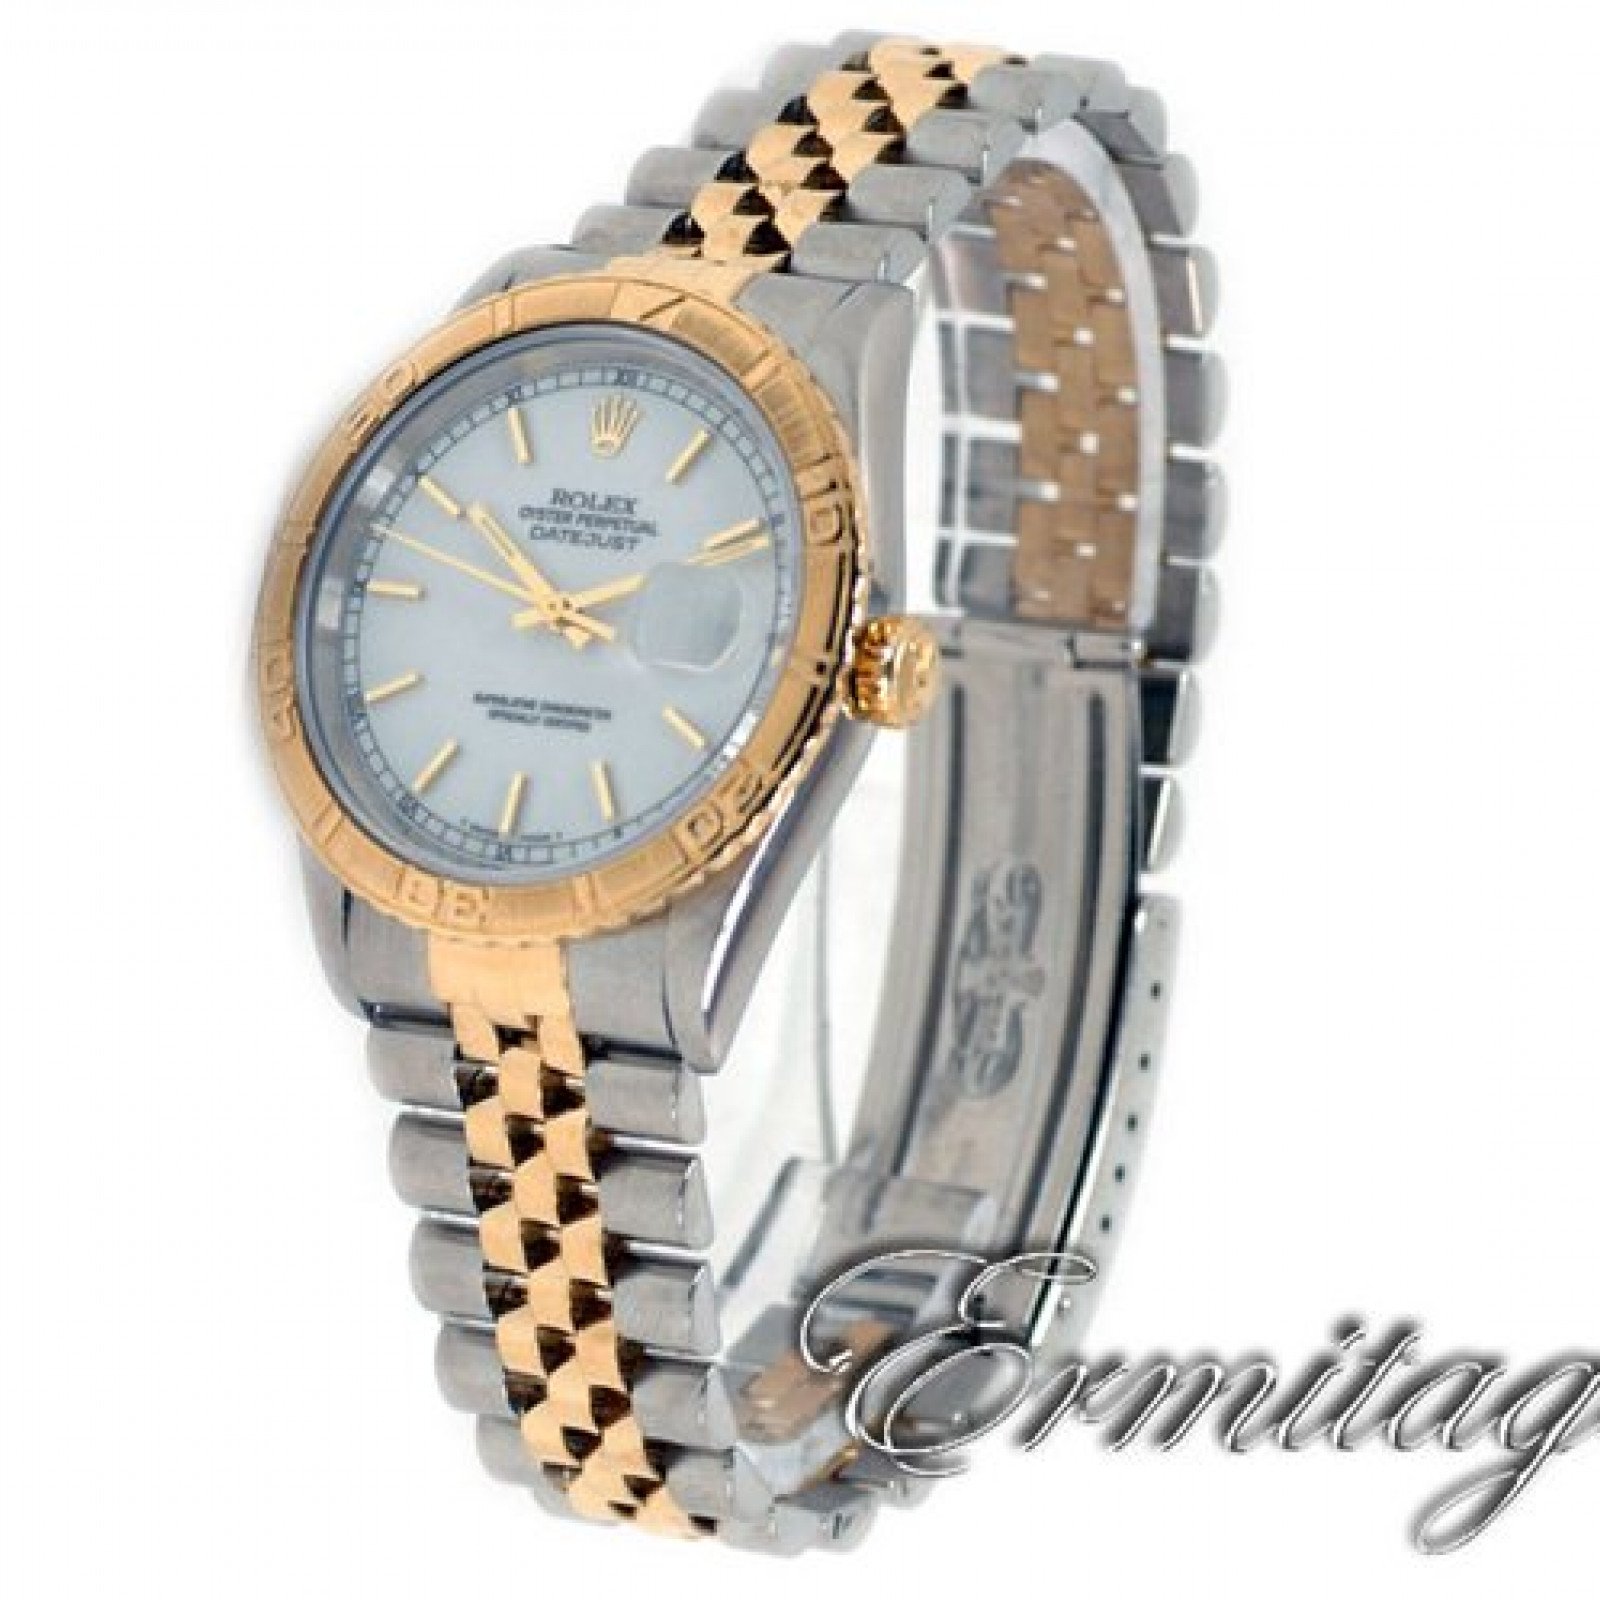 Rolex Datejust Turn-O-Graph 16263 60 Minutes Elapsed Time Rotatable